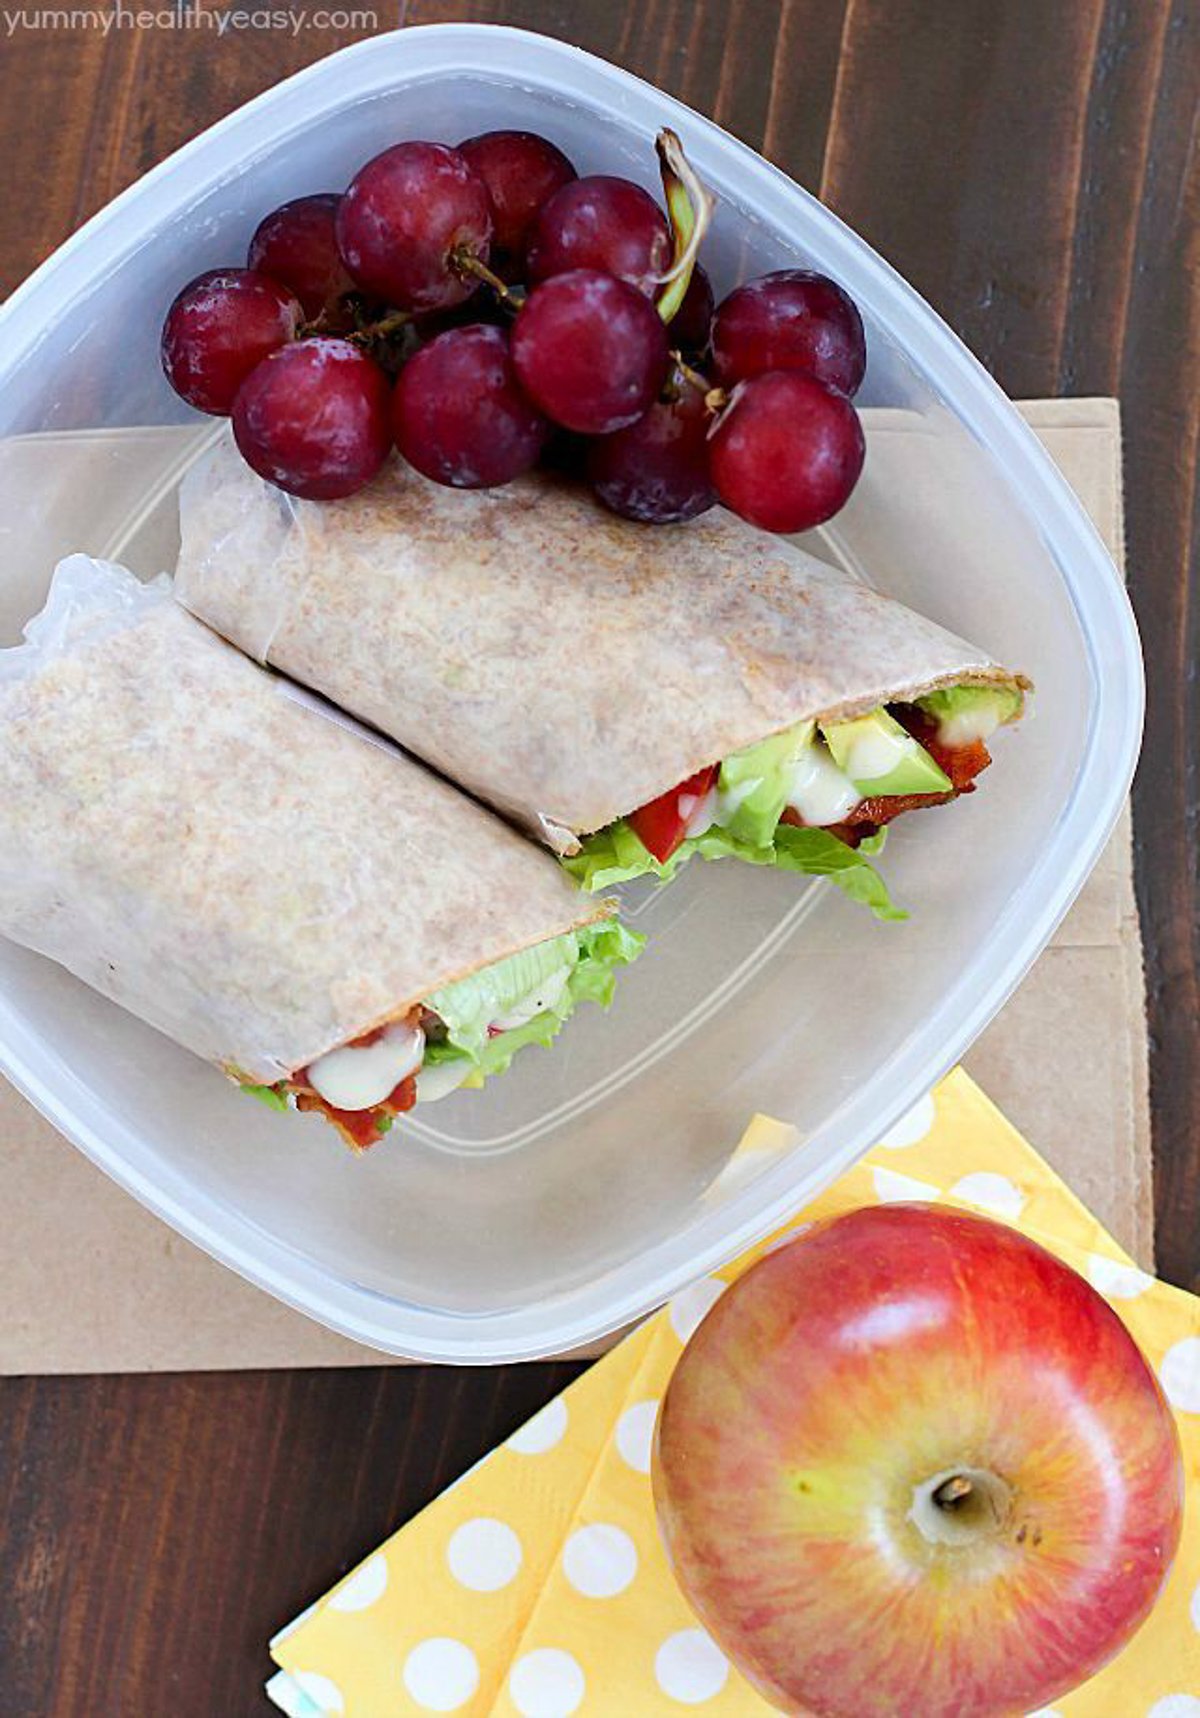 Easy Lunch Cold - LANCH RICIPES